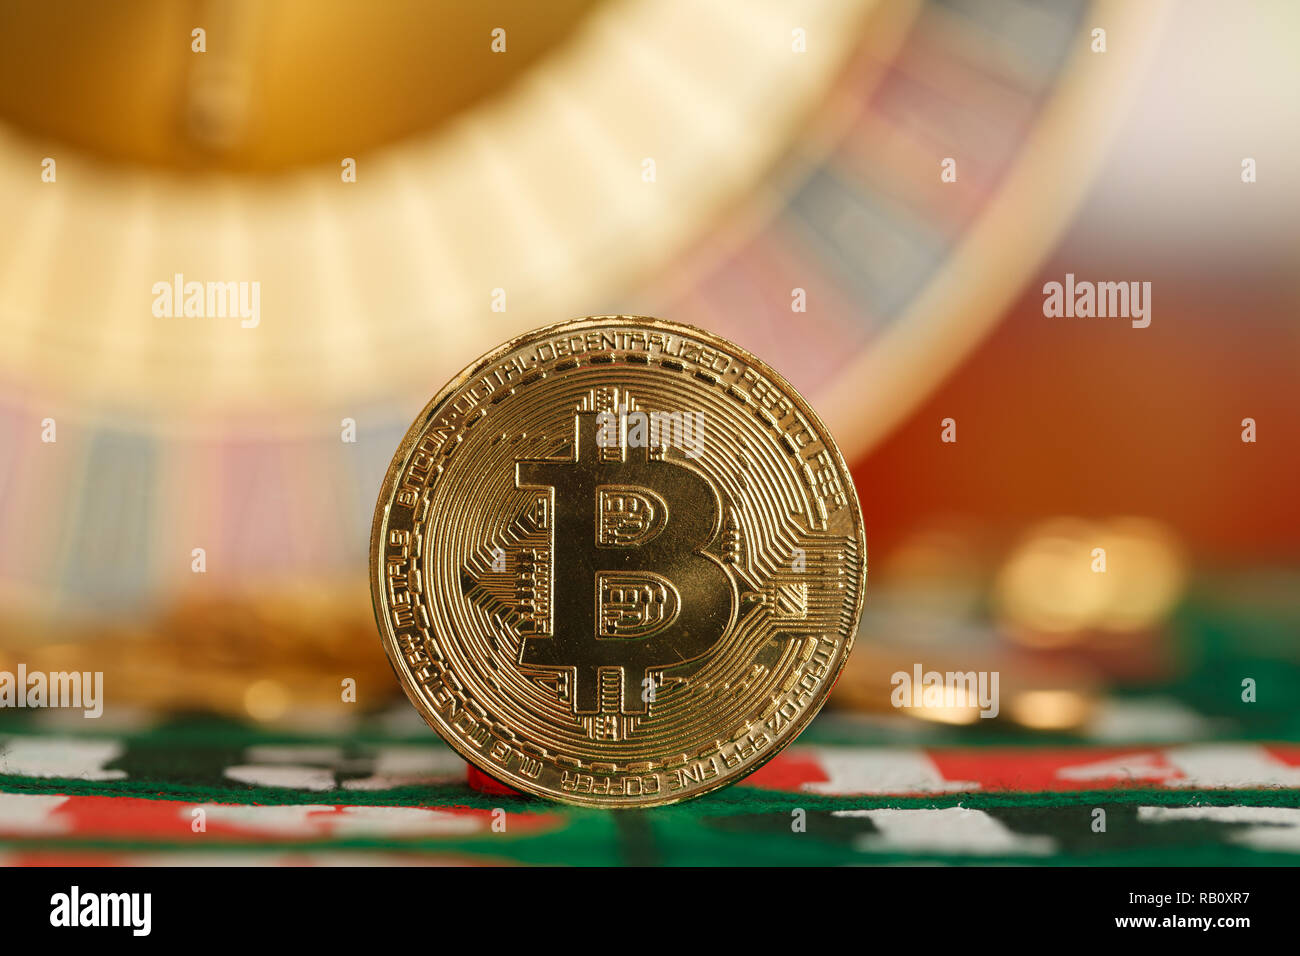 Bitcoin - currency of the future or roulette casino Stock Photo